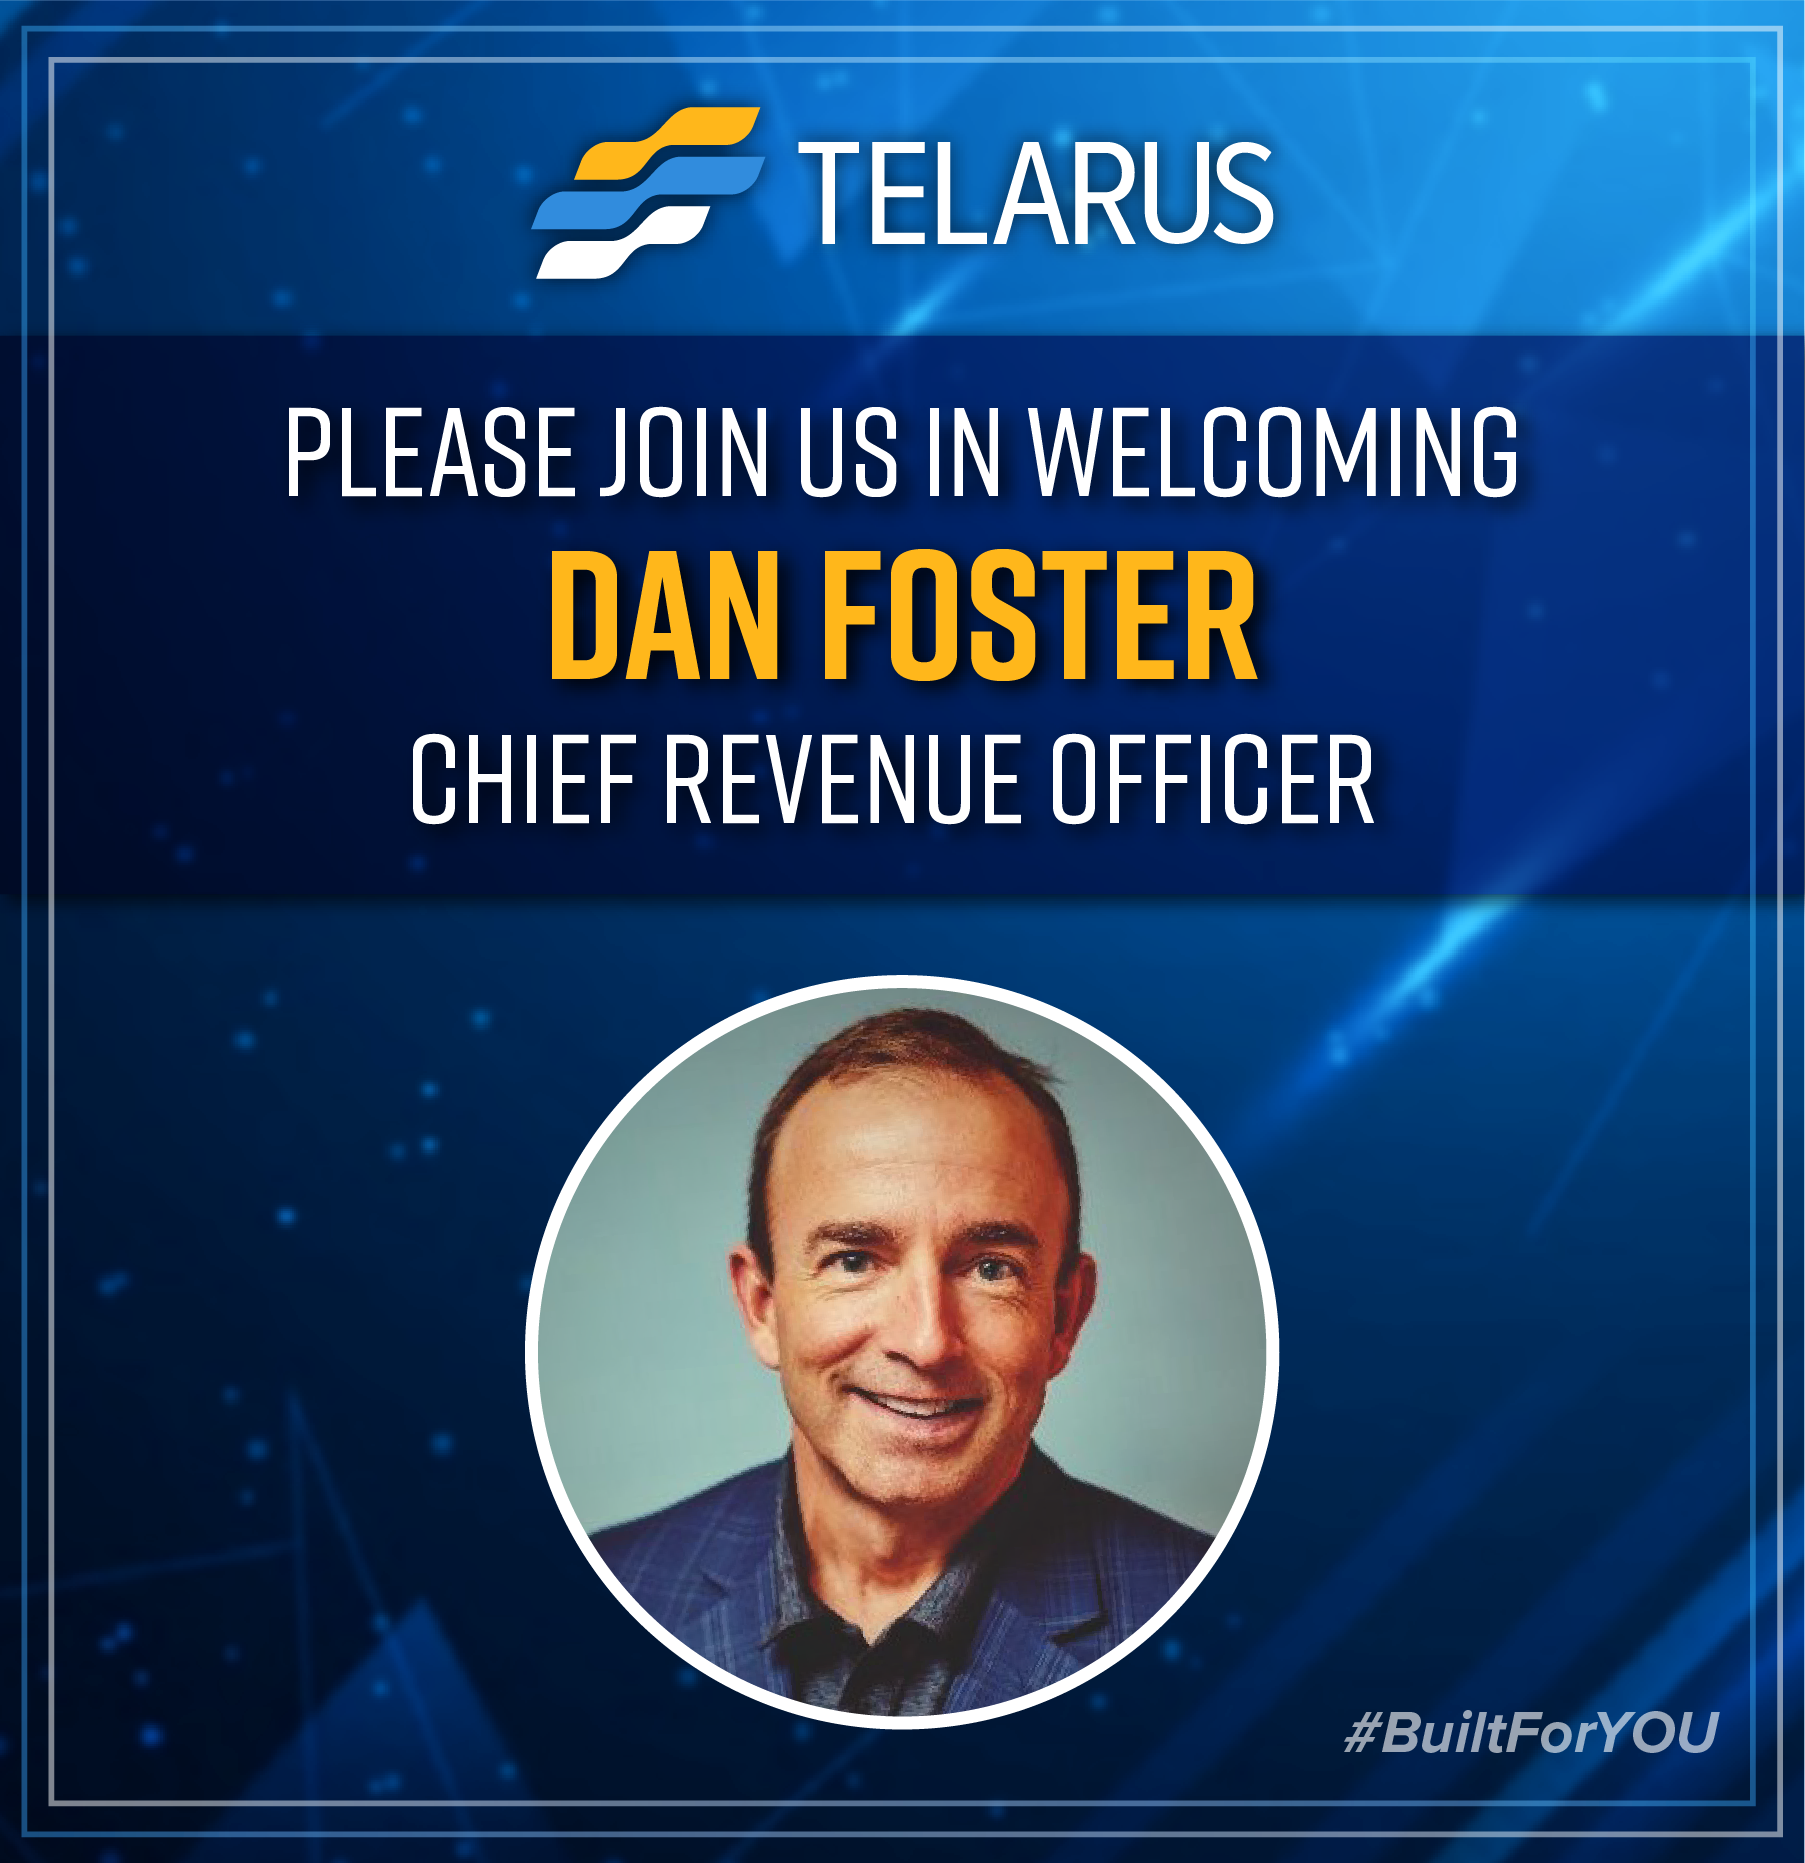 Telarus Welcomes Dan Foster as New Chief Revenue Officer